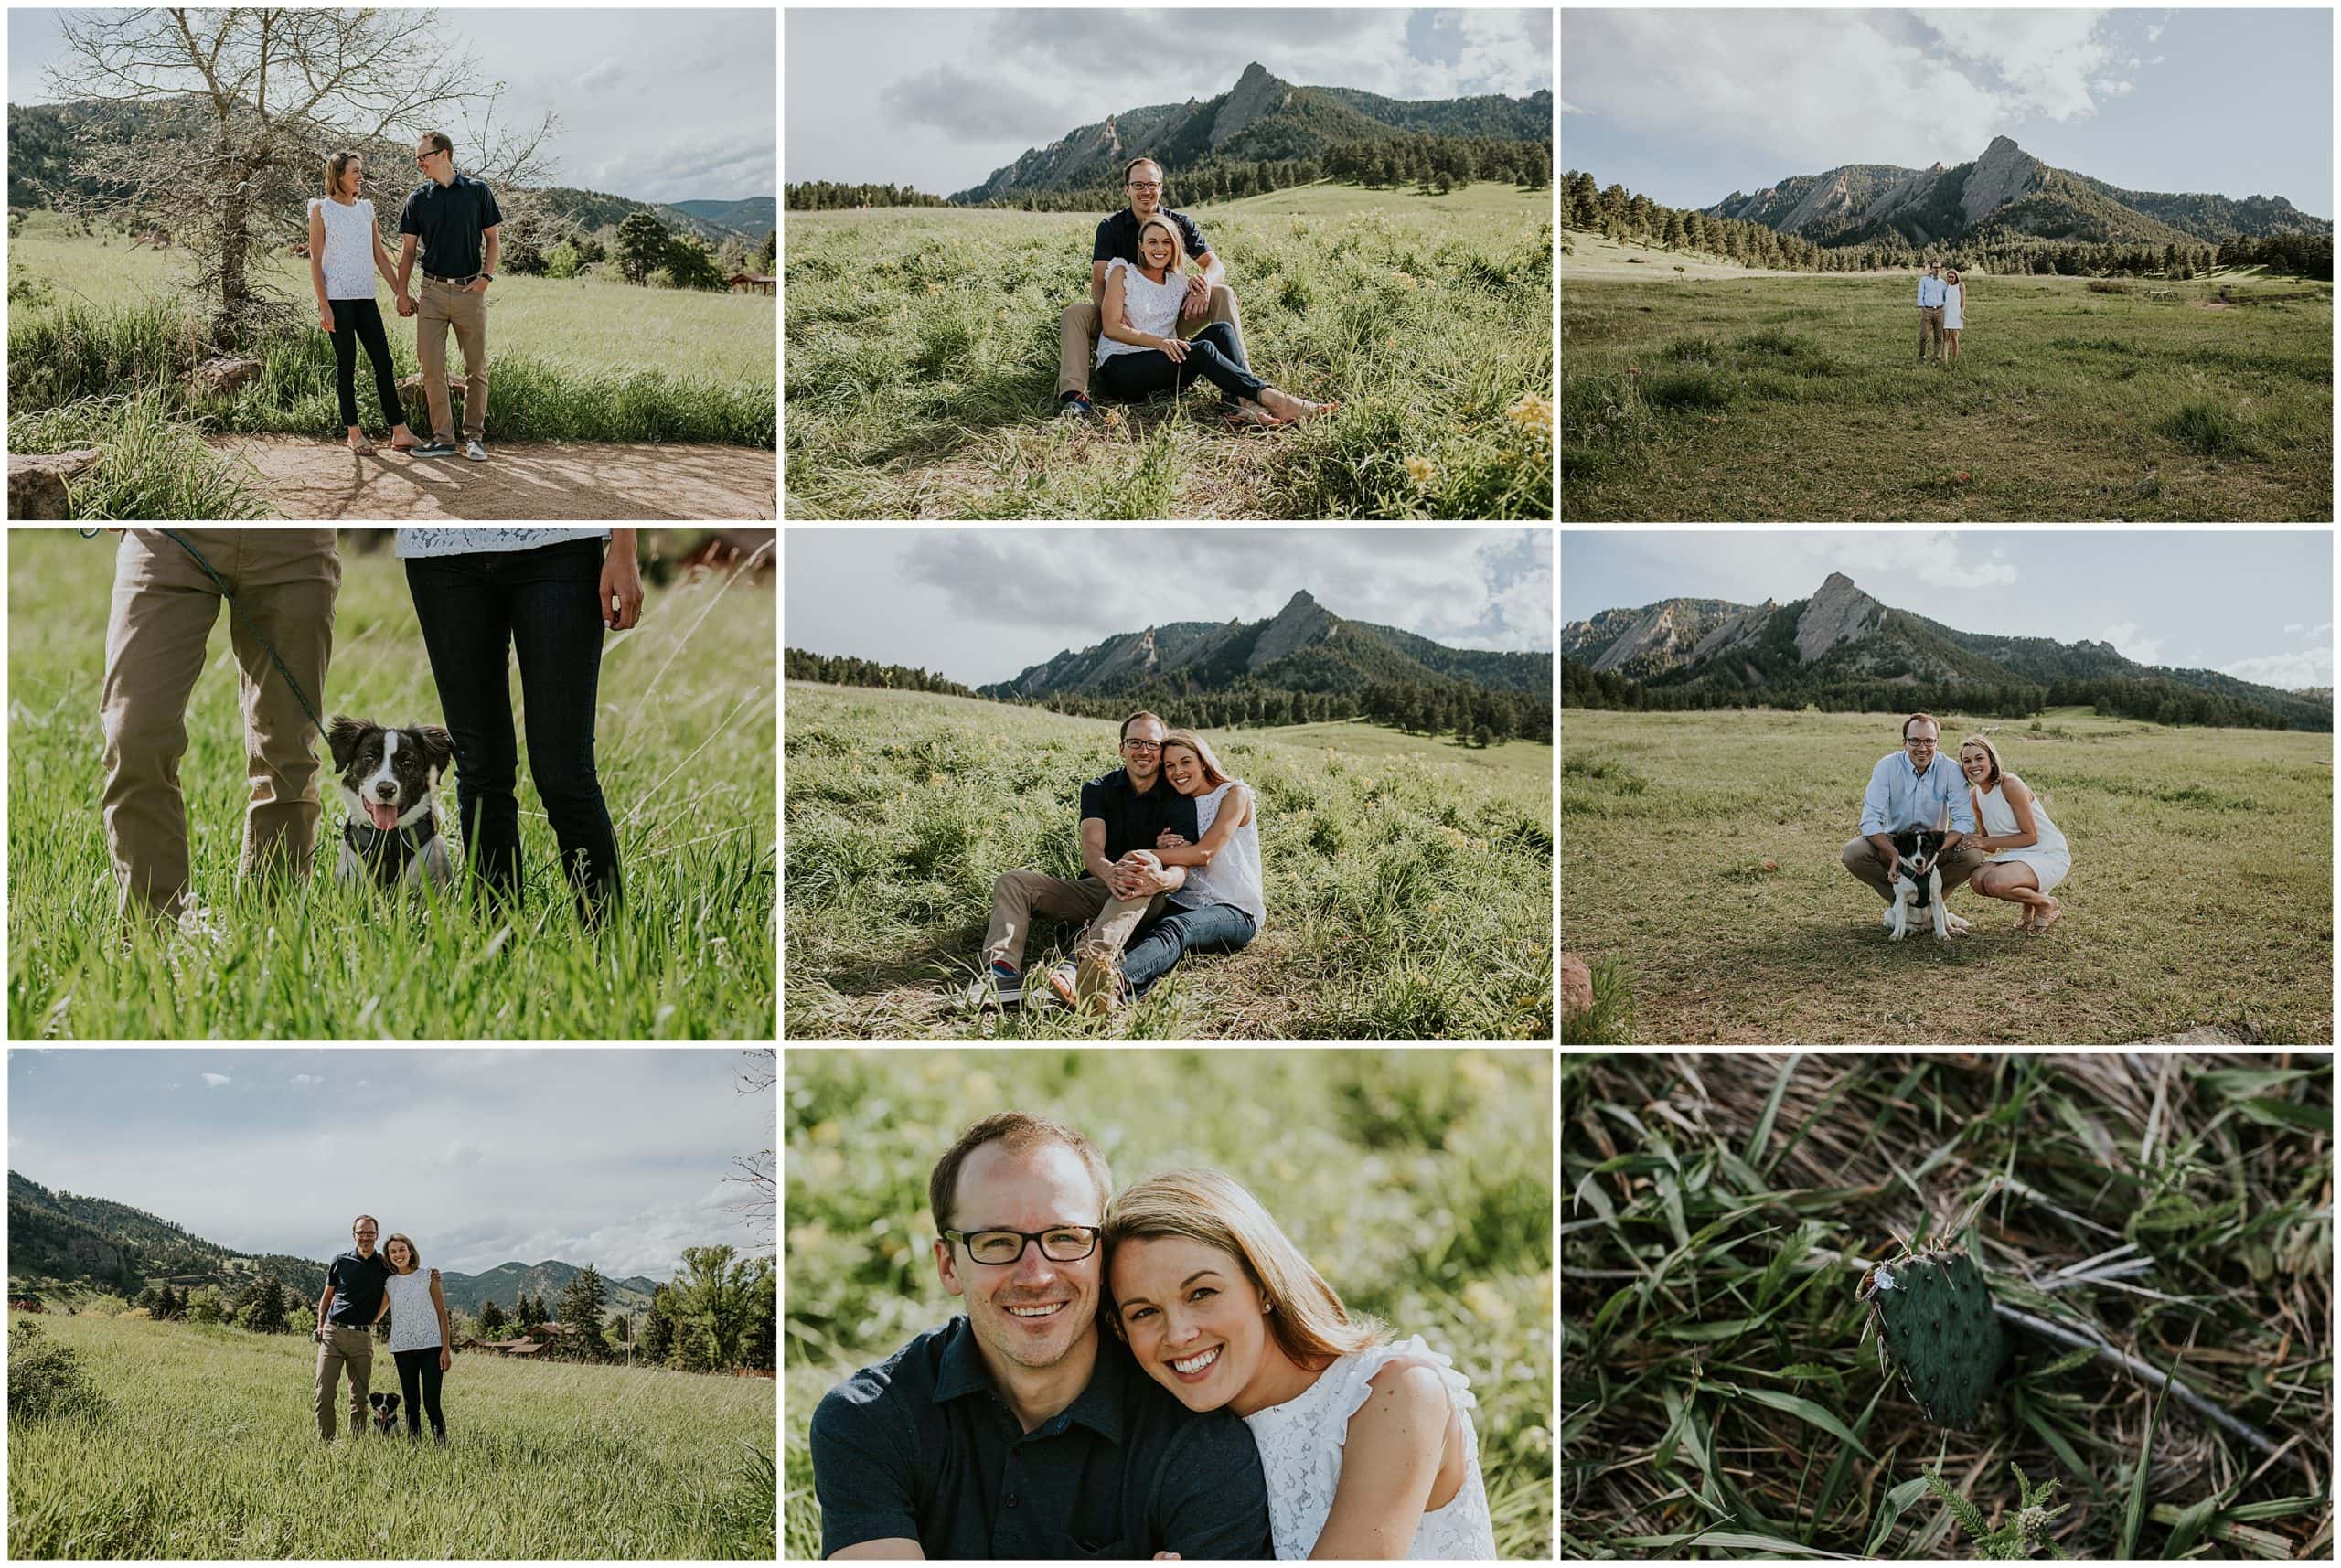 Colorado Engagement and Proposal Photography, Downtown Denver Engagement, Lookout Mountain Engagement photos, Boulder engagement photos, Chautauqua park engagement photos, RiNo engagement photos, City Park Engagement photos, St. Mary's Glacier engagement photos, Hot Air Balloon Proposal, Lost Gulch Overlook Engagement photos, Lookout Mountain Proposal, Engagement session with dogs, Dogs and engagement session, Summer engagement, Winter engagement, Fall engagement, Mountain airport engagement photos, having fun during engagement photos